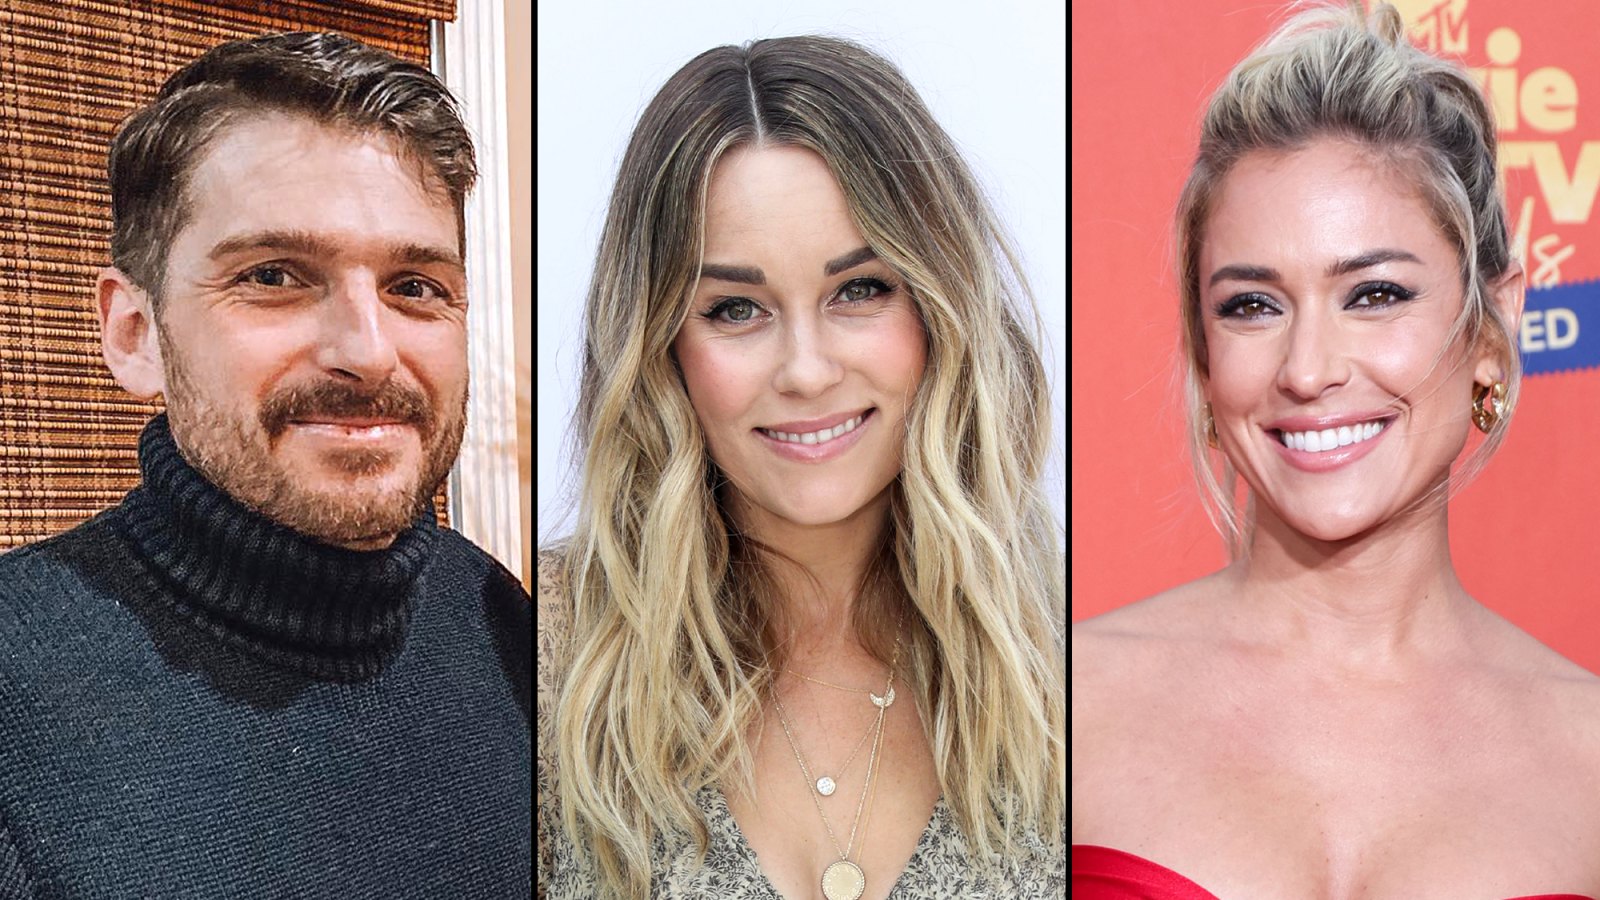 Laguna Beach’s Talan Torriero Reacts to Lauren Conrad and Kristin Cavallari’s Confession That They Were Both ‘Hooking Up’ With Him